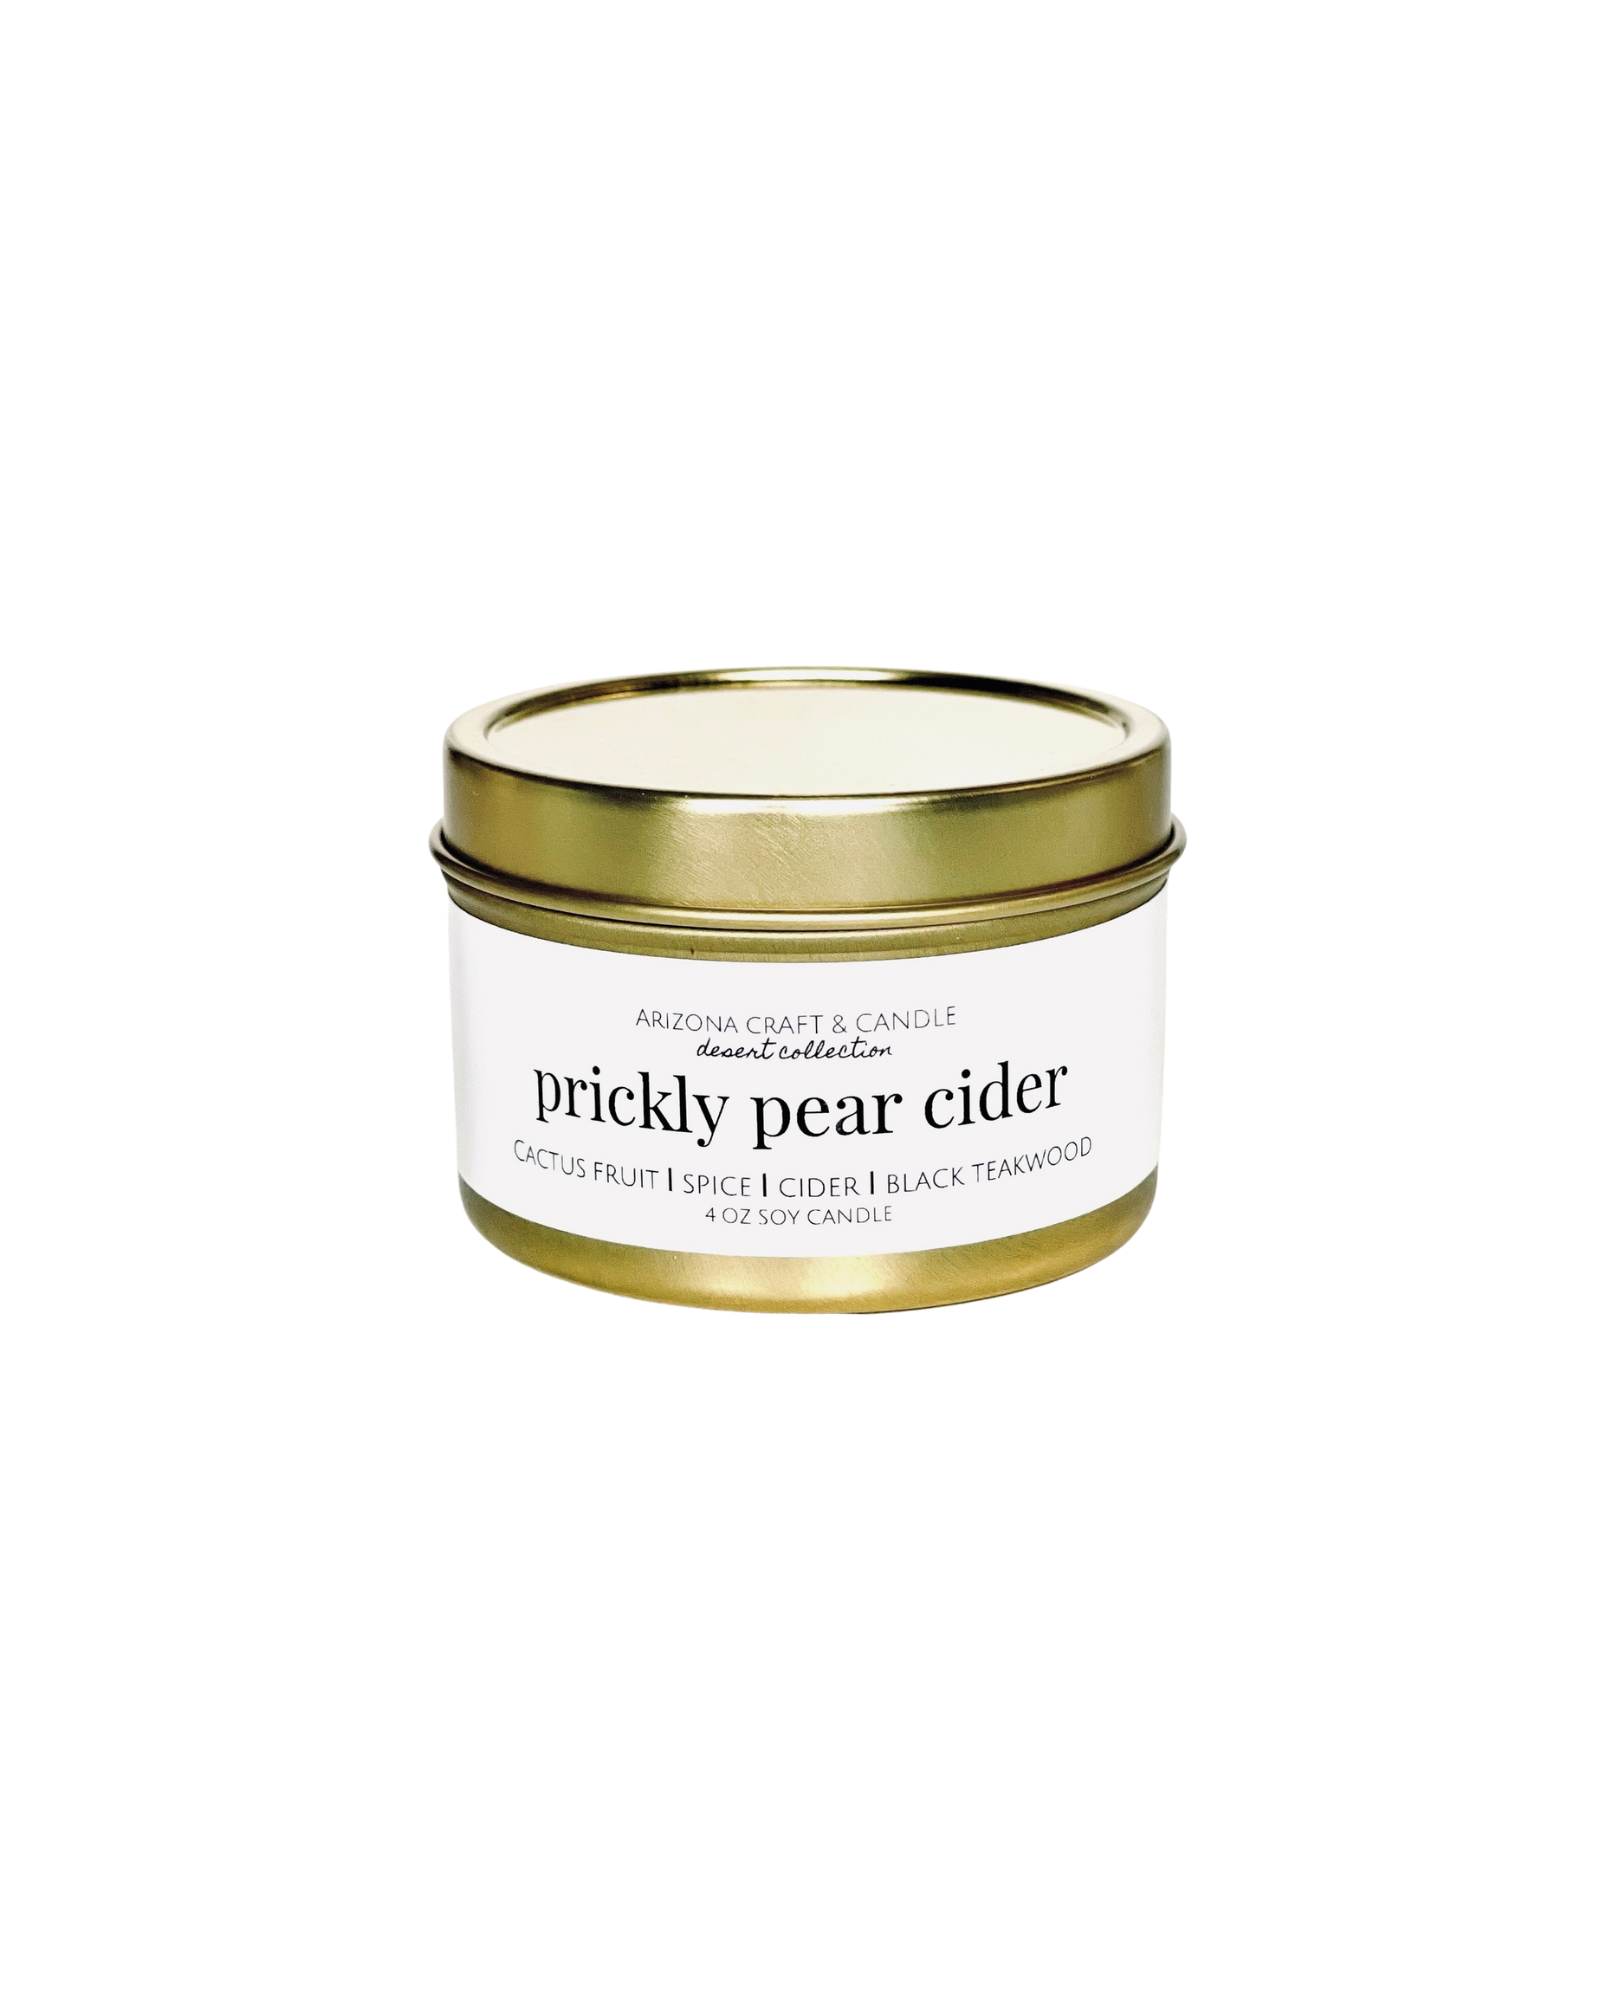 Gold travel prickly pear cider candle 